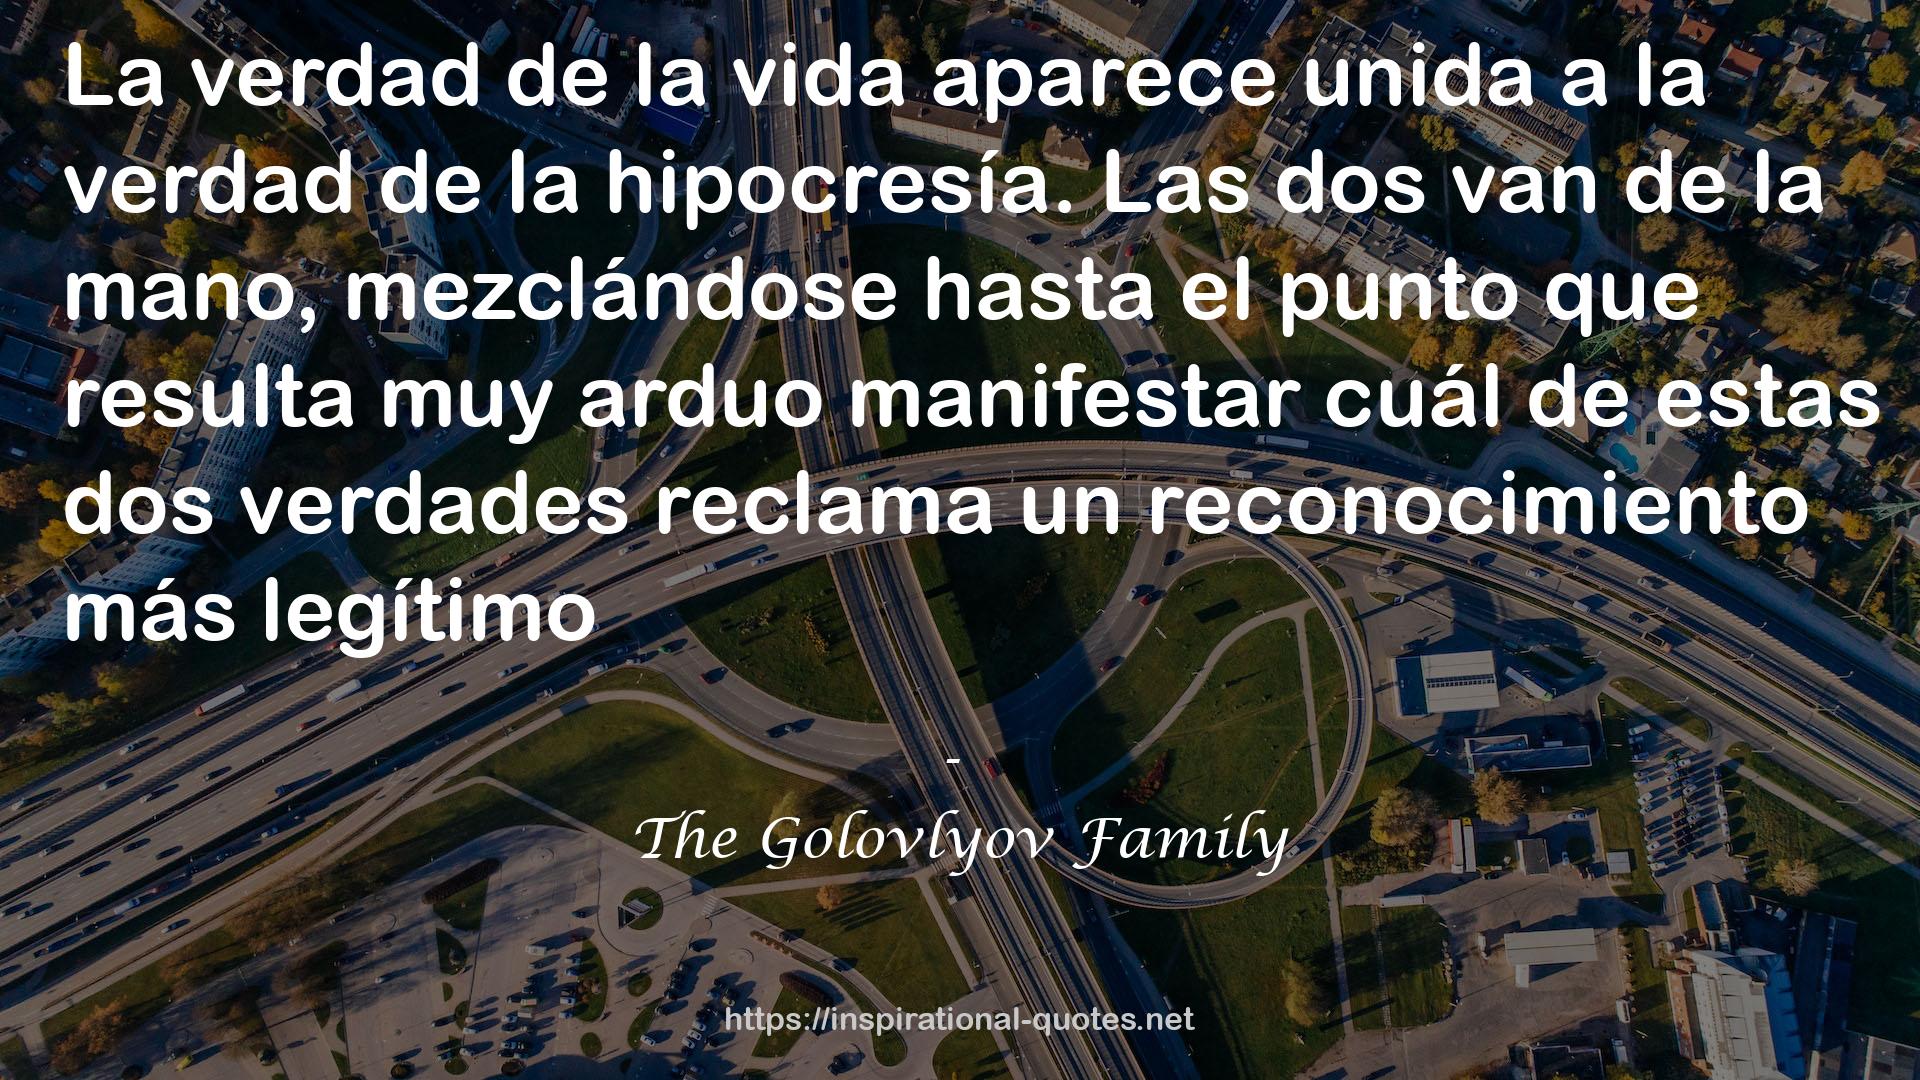 The Golovlyov Family QUOTES